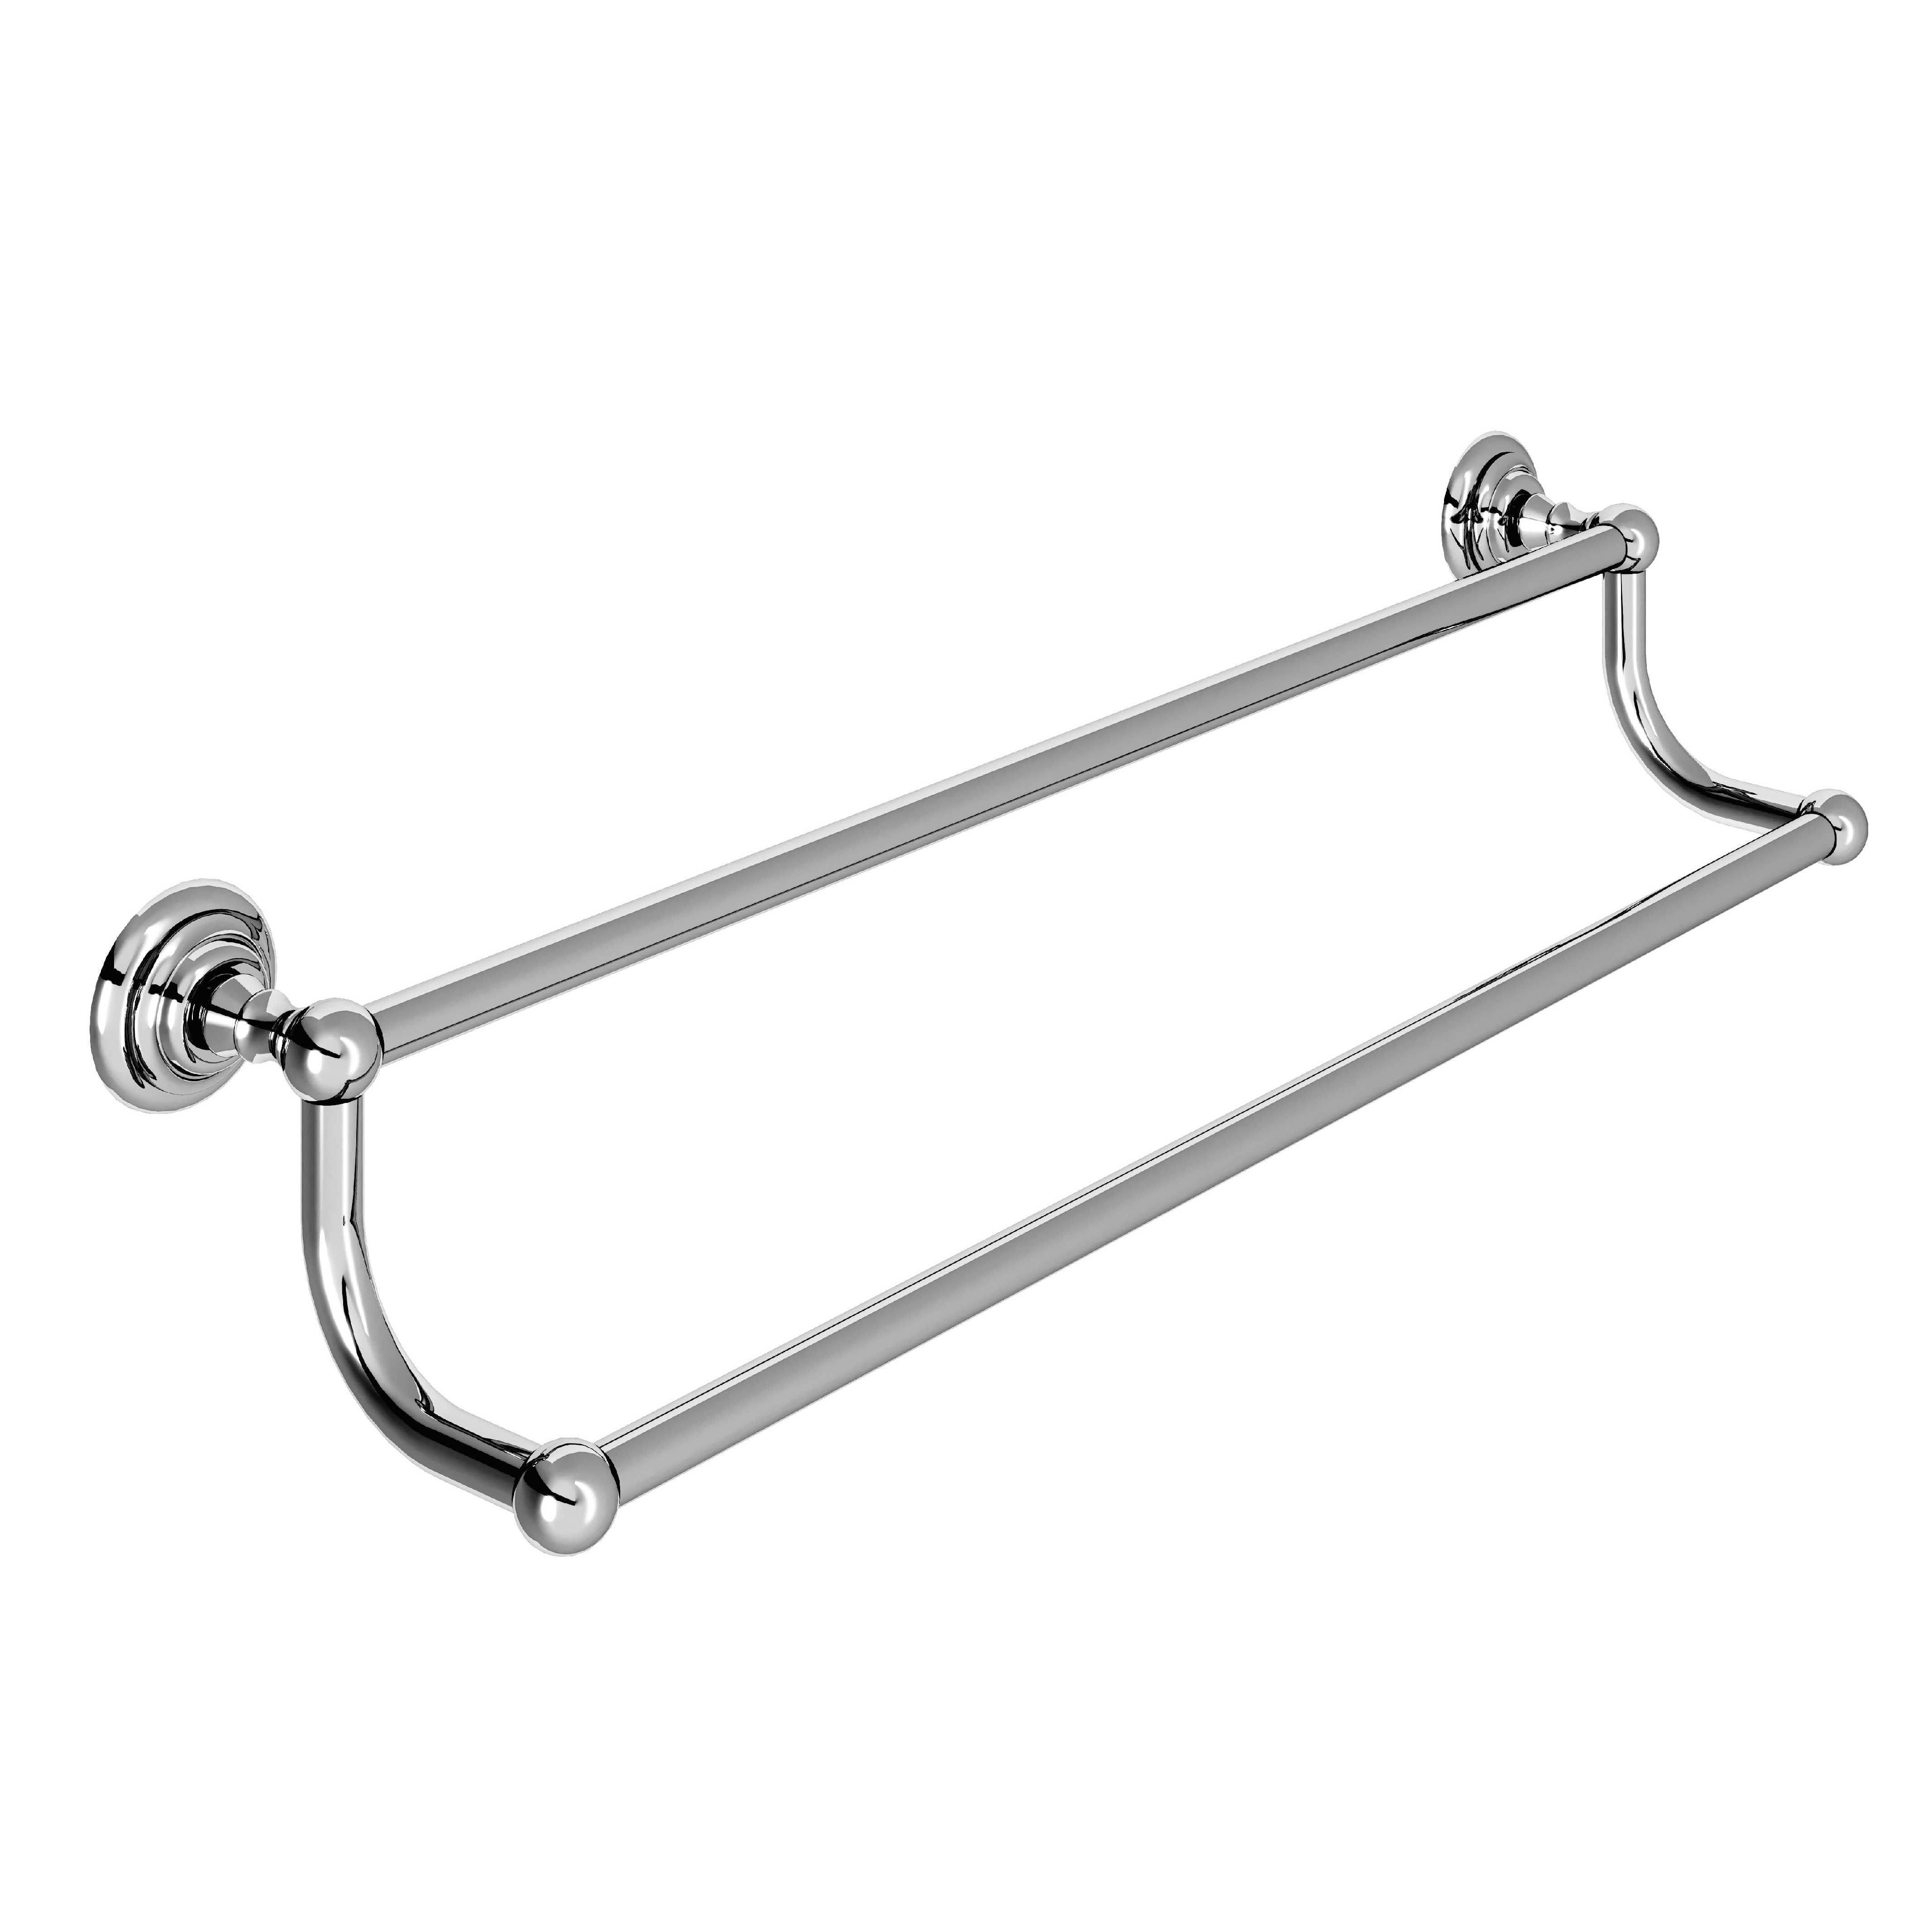 M20-509 Wall mounted double towel bar